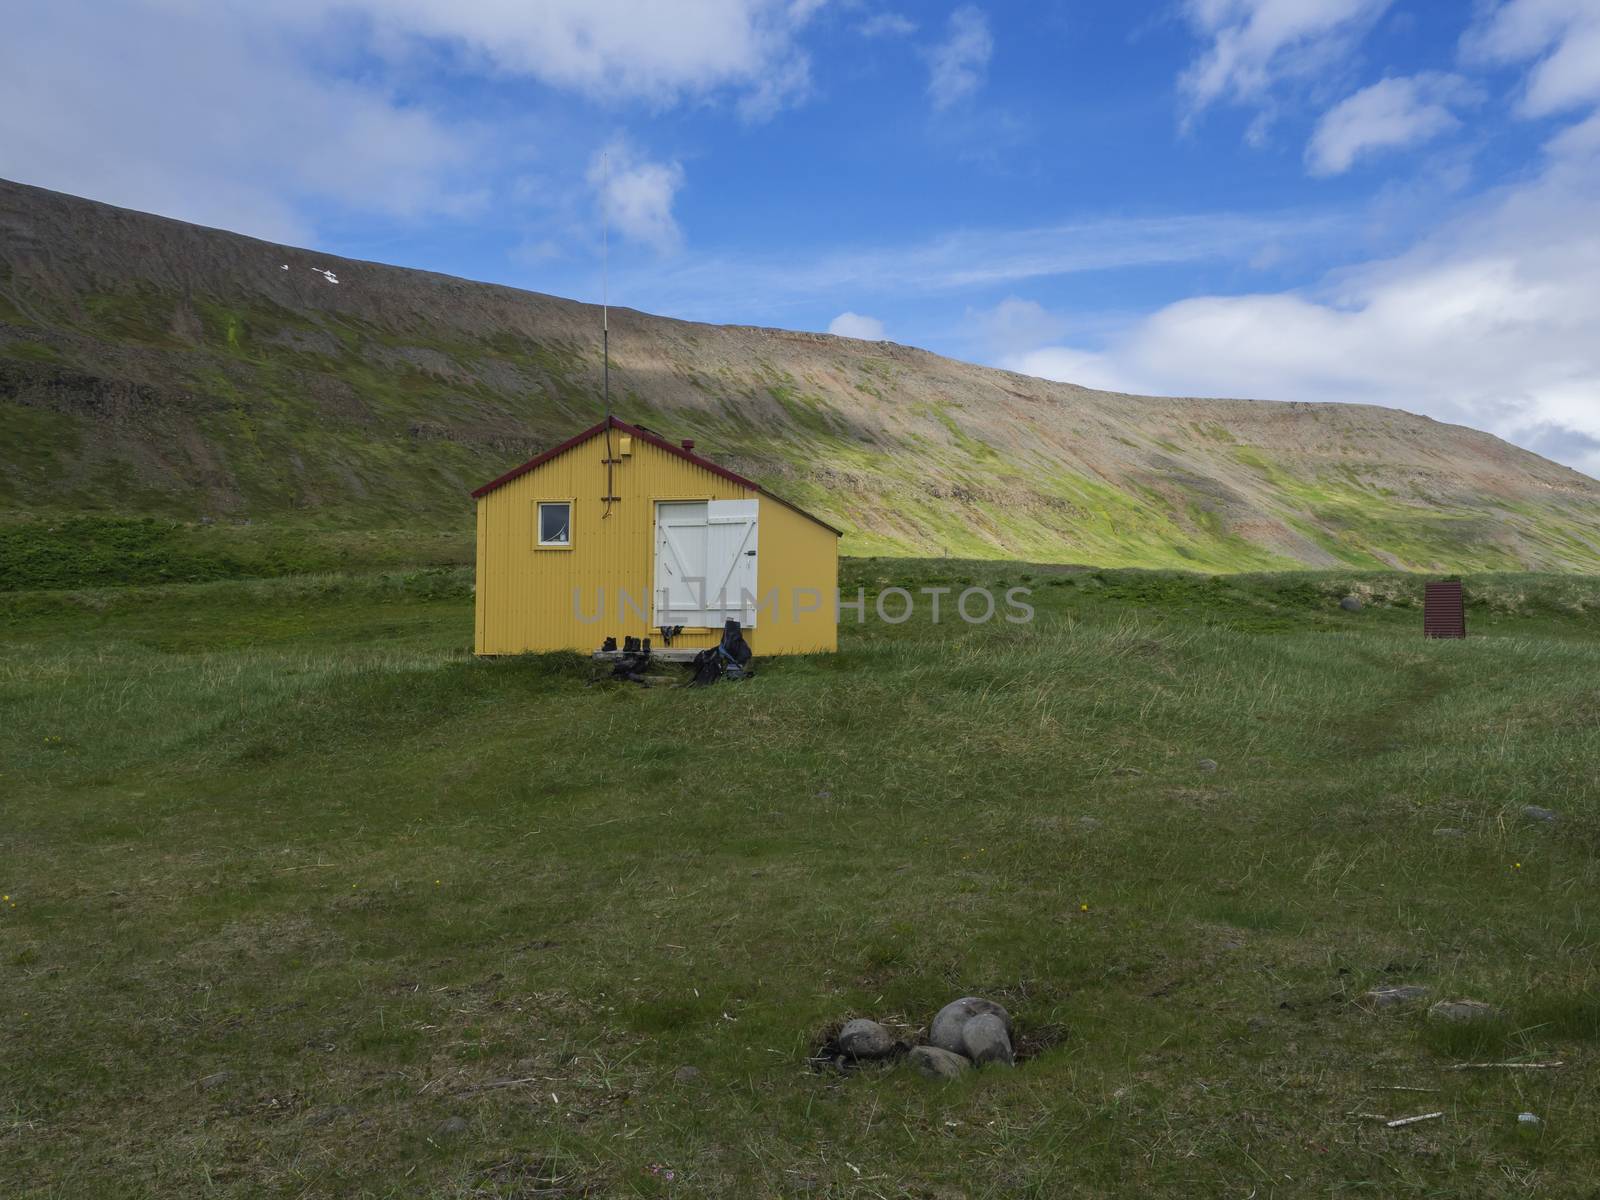 View on latrar camp site in adalvik cove with yellow emergency shelter cabin in west fjords nature reserve Hornstrandir in Iceland, with green grass meadow, hills and blue clouds background